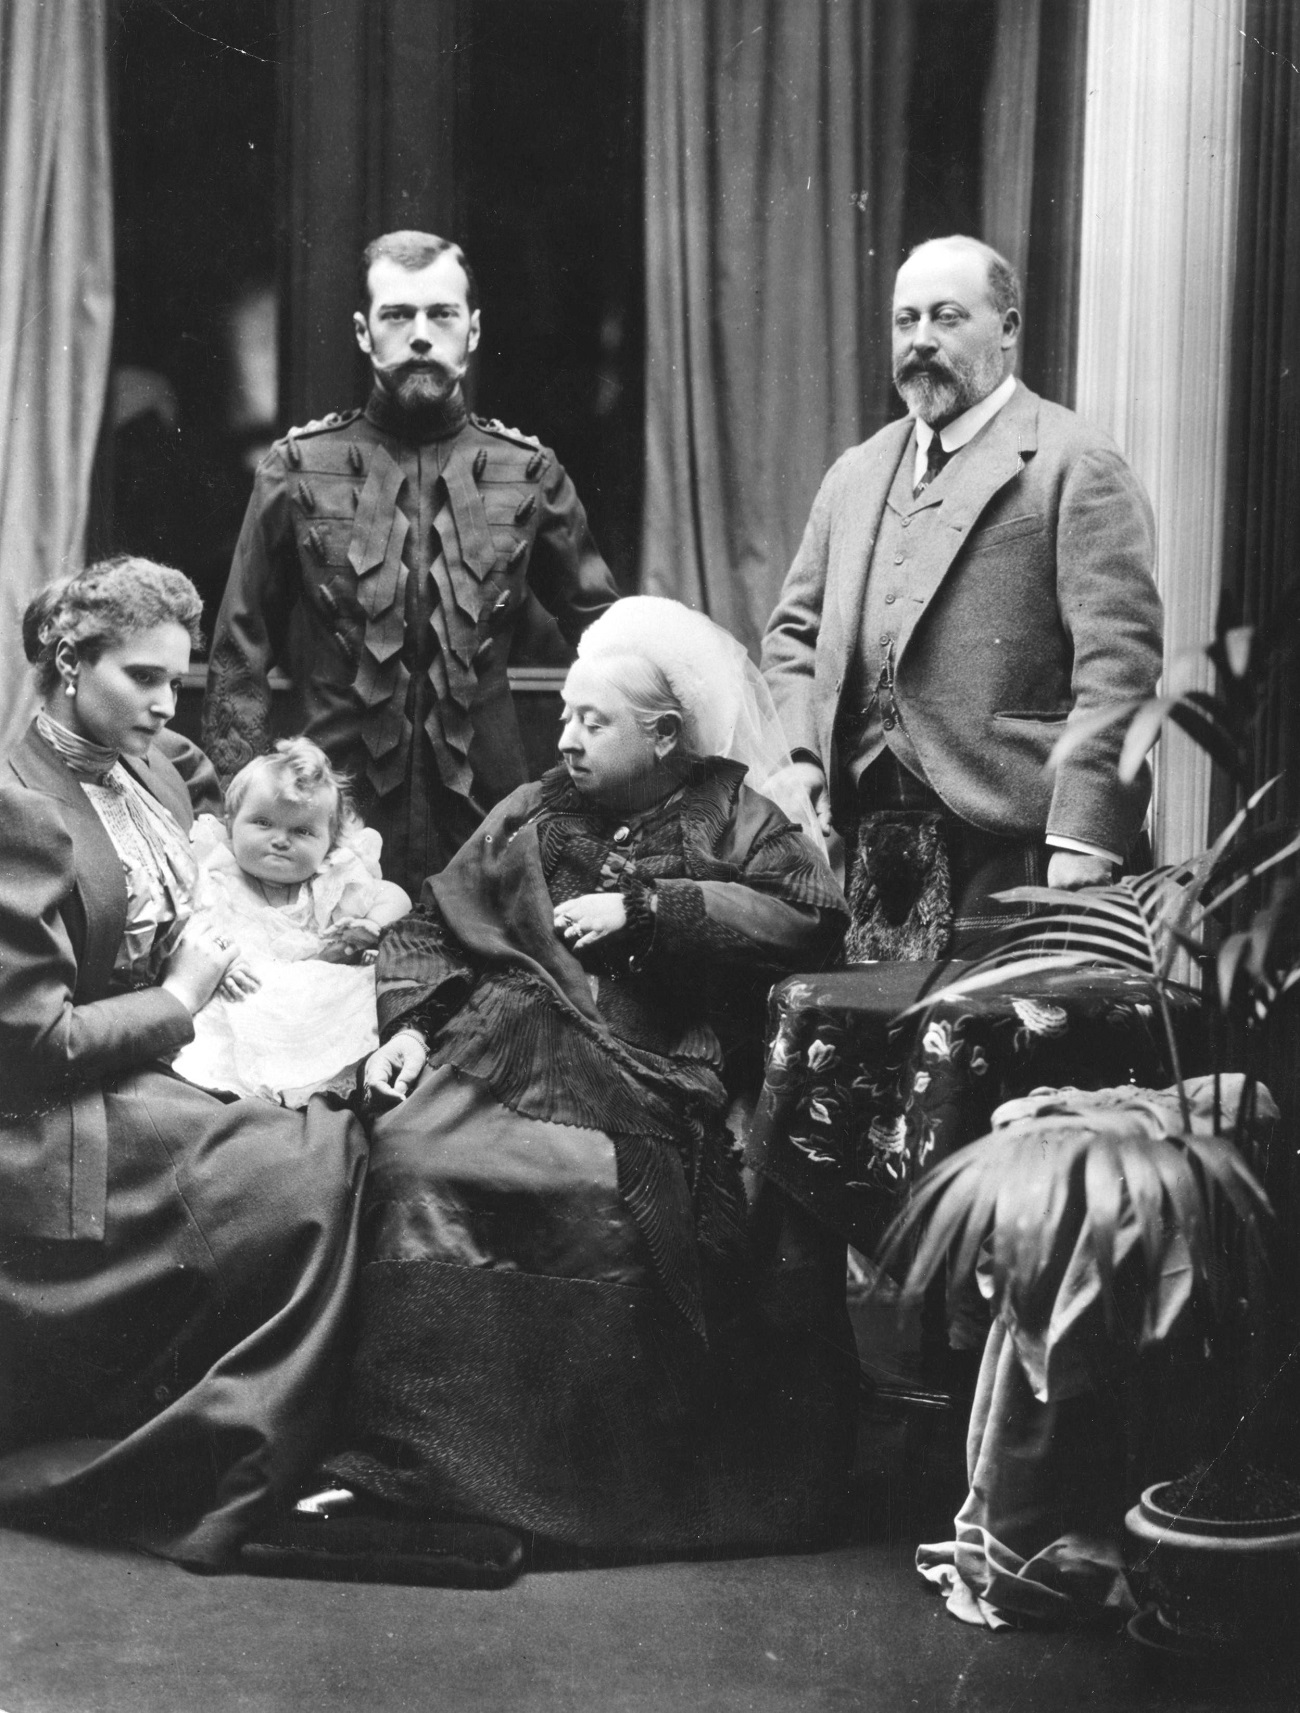 Tsar Nicholas II was appointed an honorary member of the Royal Scots Greys by Britain's Queen Victoria in 1894, after he became engaged to Alexandra Feodorovna (Princess Alix of Hesse), who was Victoria’s granddaughter. // L-R: Tsarina Alexandra Feodorovna, Grand Duchess Tatiana, Tsar Nicholas II, Queen Victoria, and Edward, Prince of Wales. Balmoral, 1896.